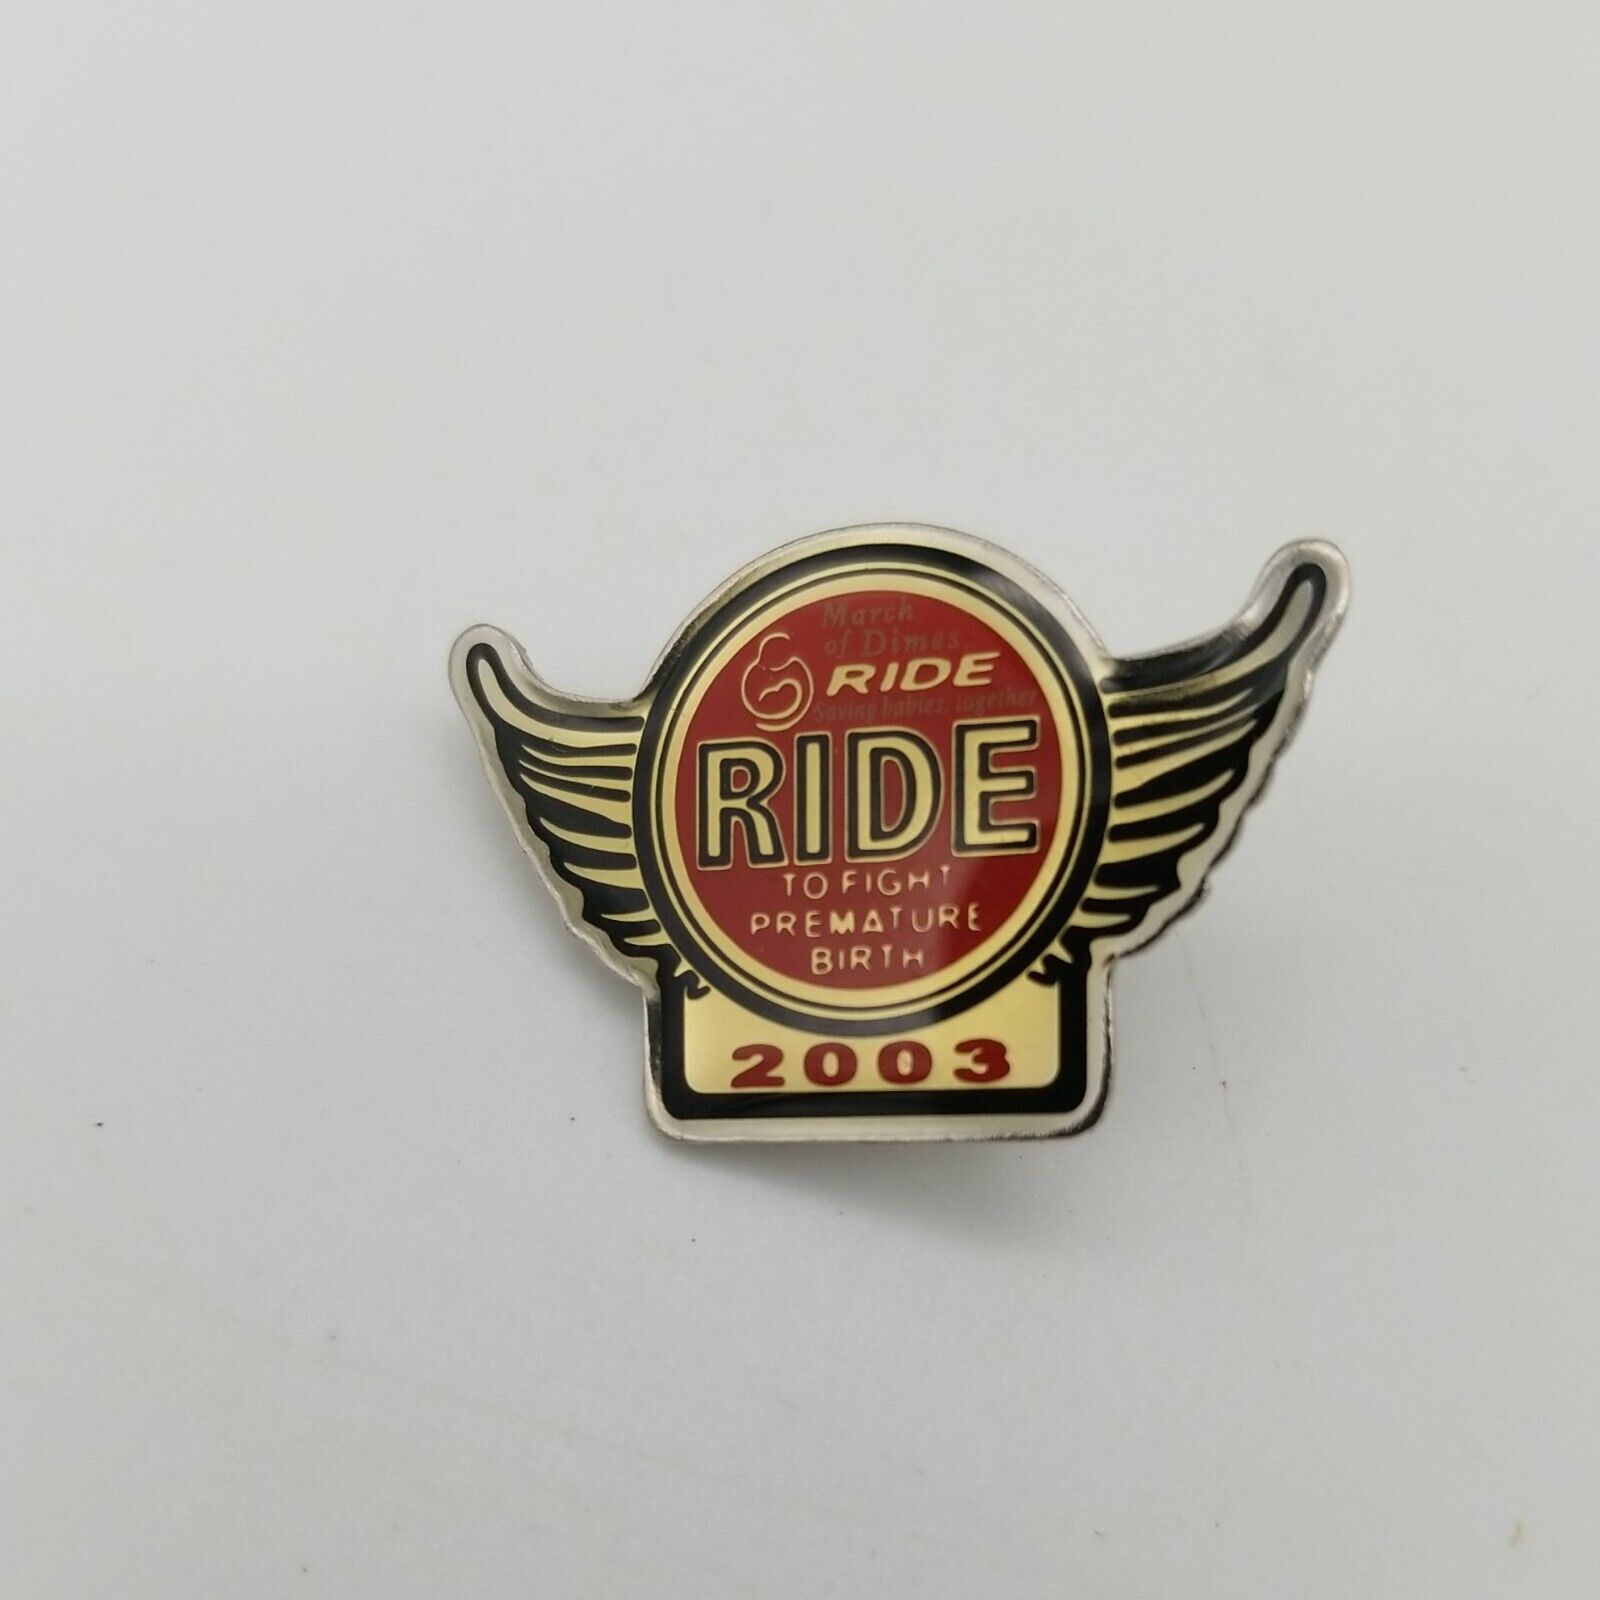 Ride to Fight Premature Birth Motorcycle Biker Pin March of Dimes Saving Babies